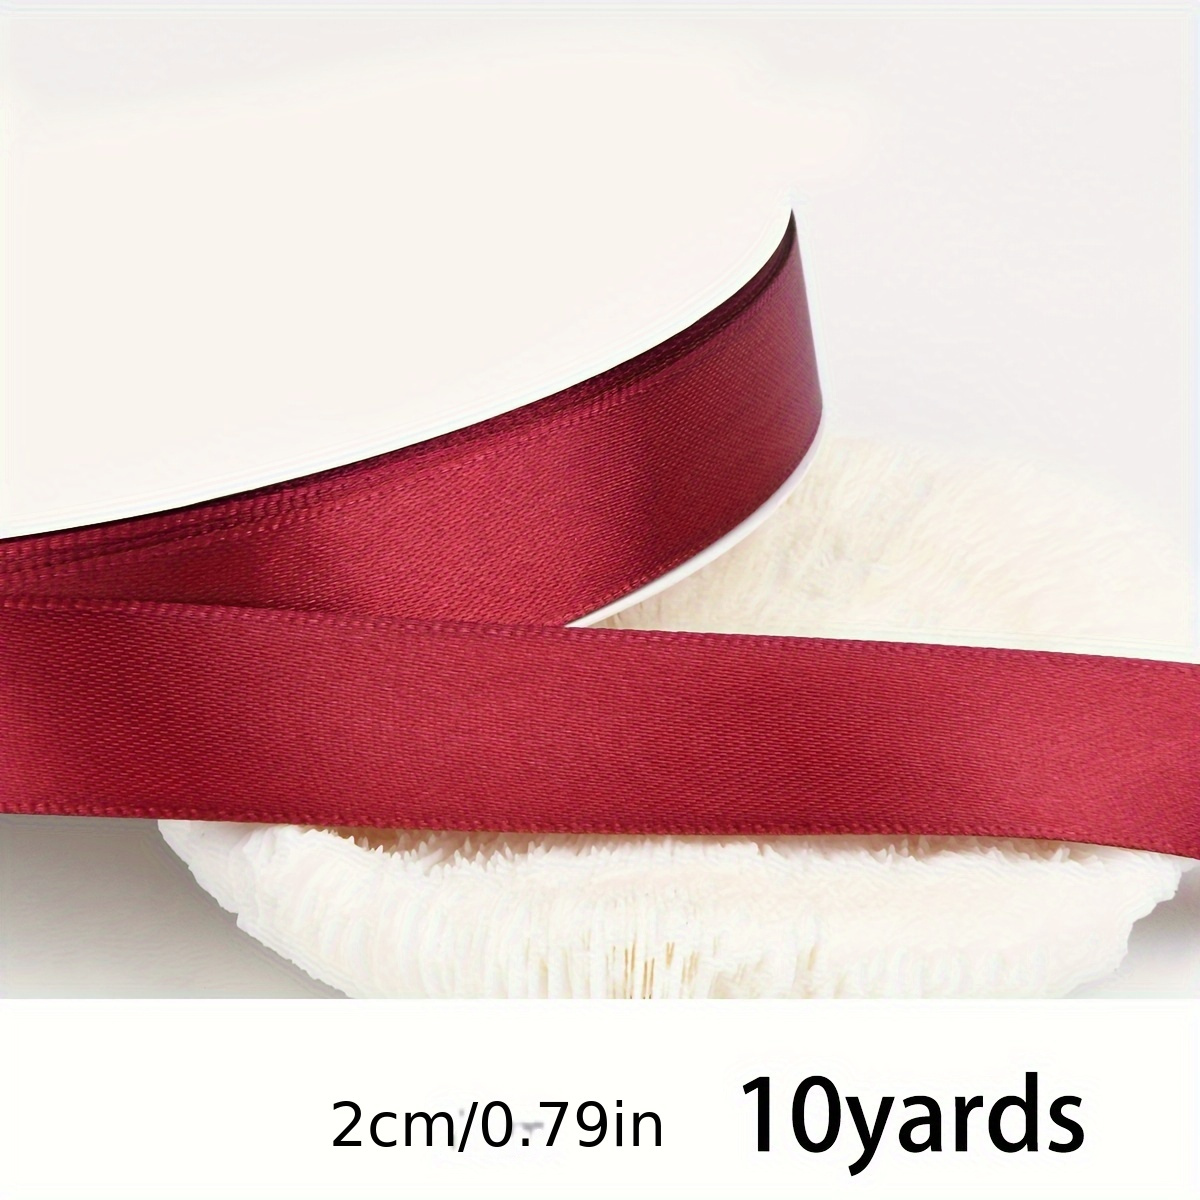 1roll Red Satin Ribbon, 787.4inch Red Ribbon For Gift Wrapping, Double  Faced Polyester Christmas Ribbon For Wedding Valentine's Birthday Party  Decorat